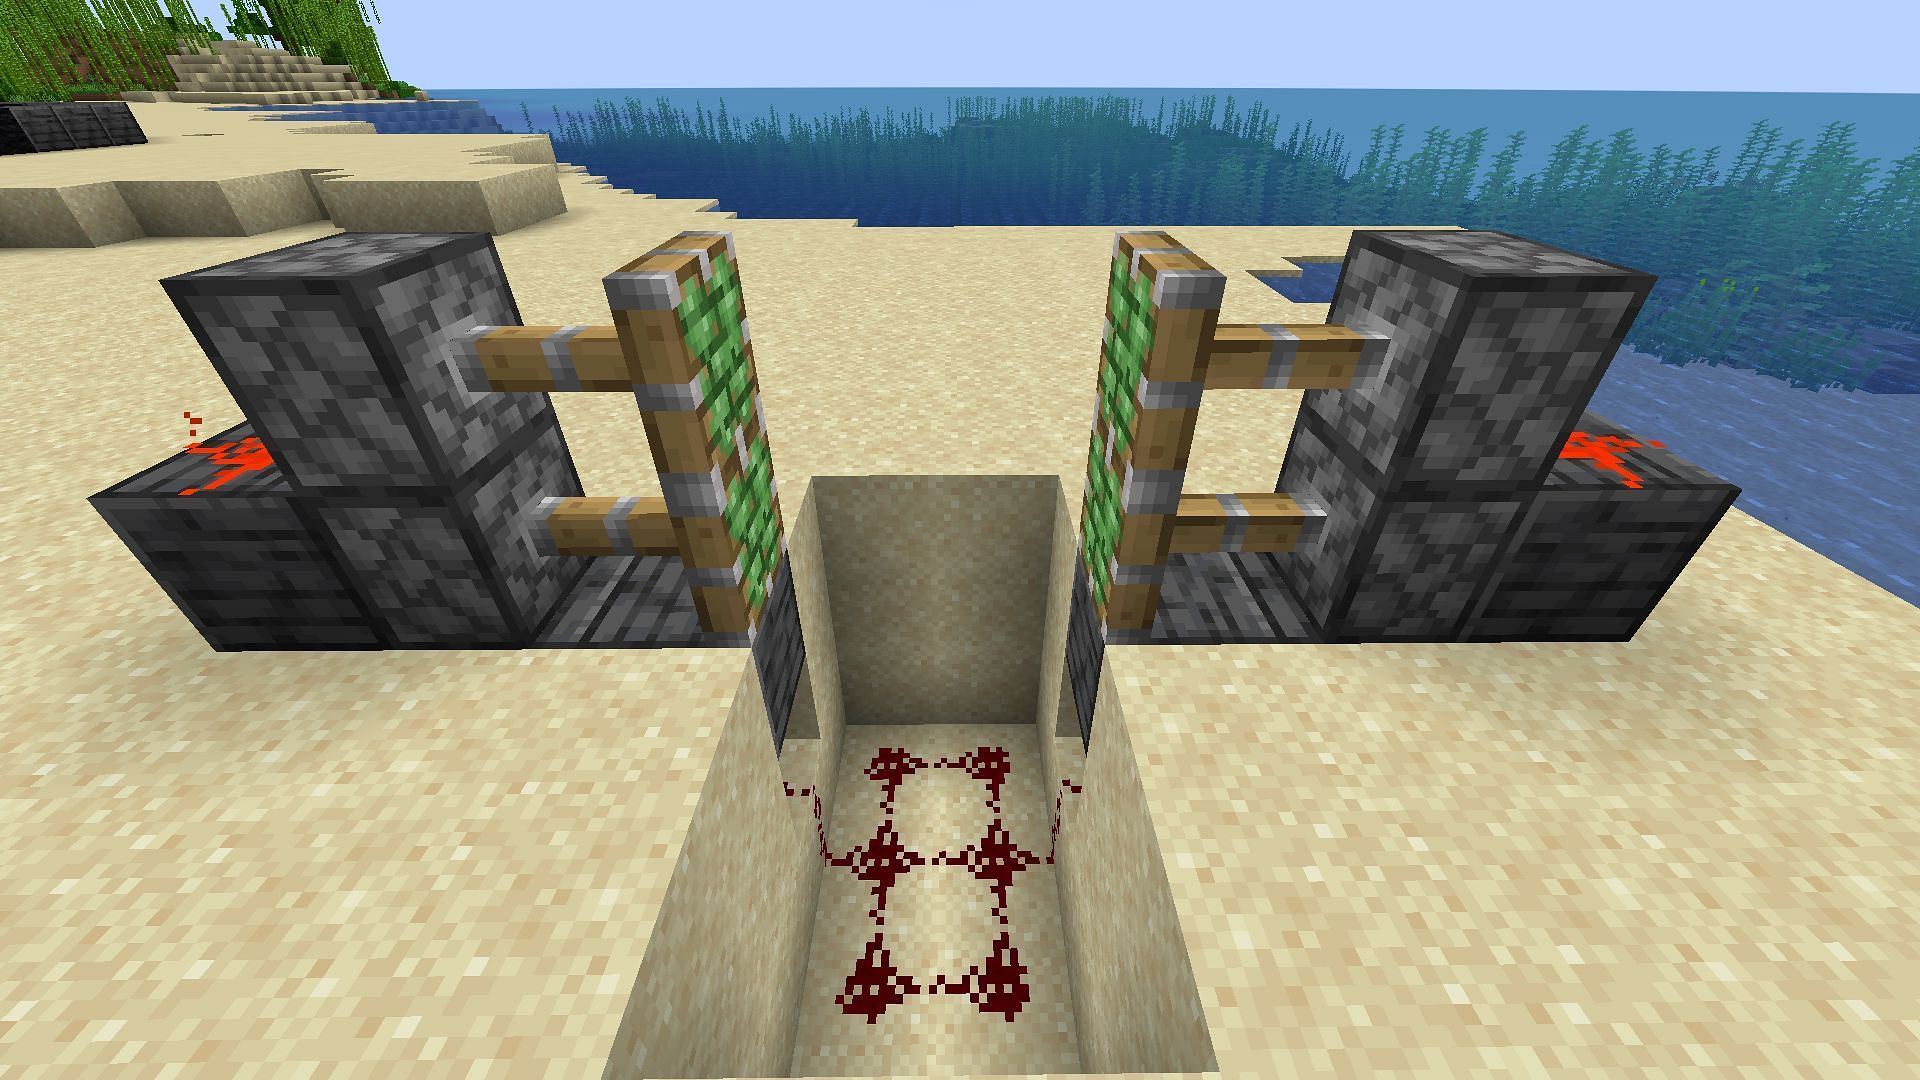 The blocks and pistons put in place (Image via Minecraft)